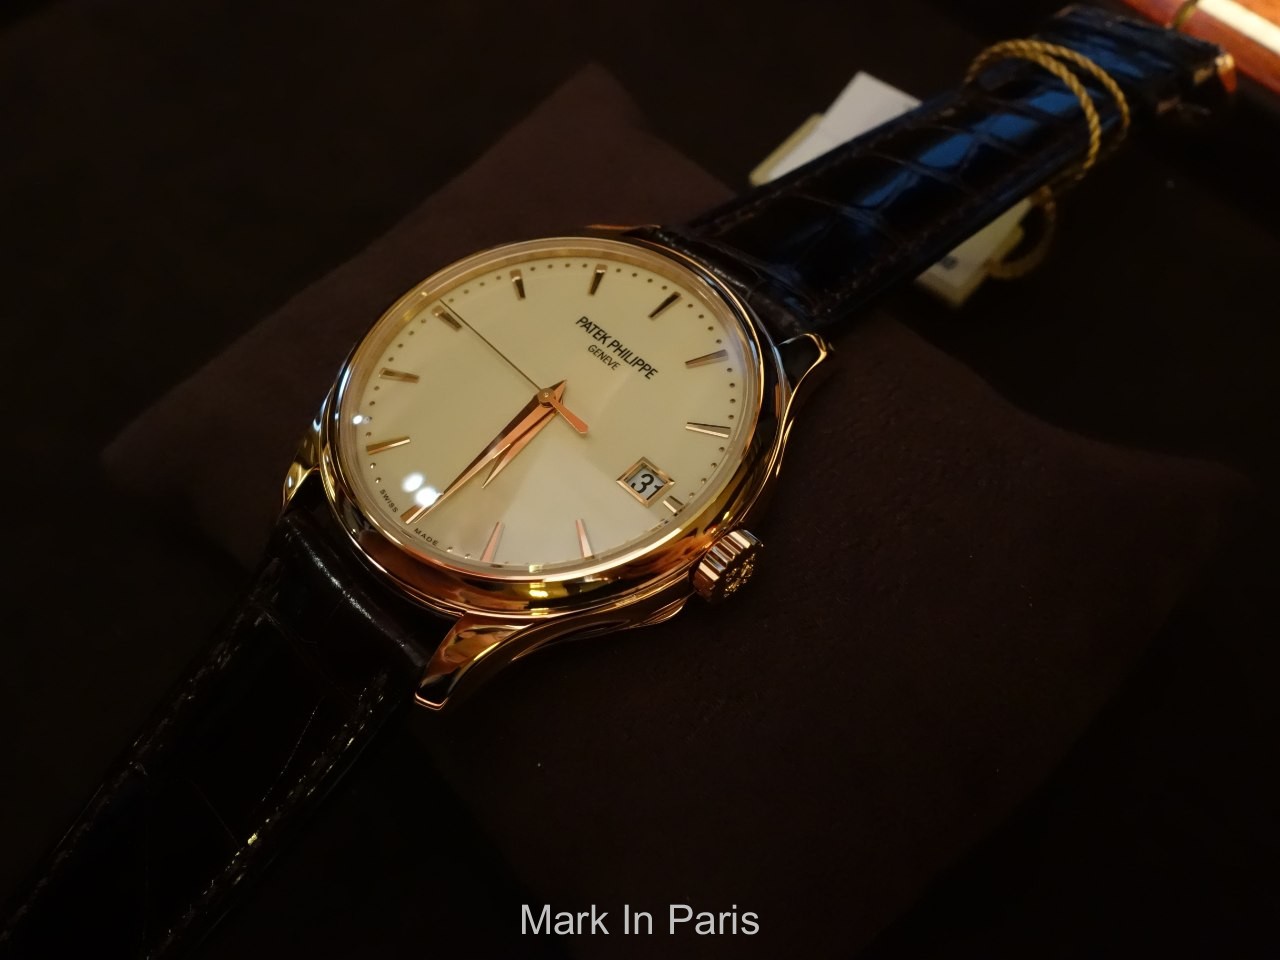 Hands-on Review of the Patek Philippe 5227R